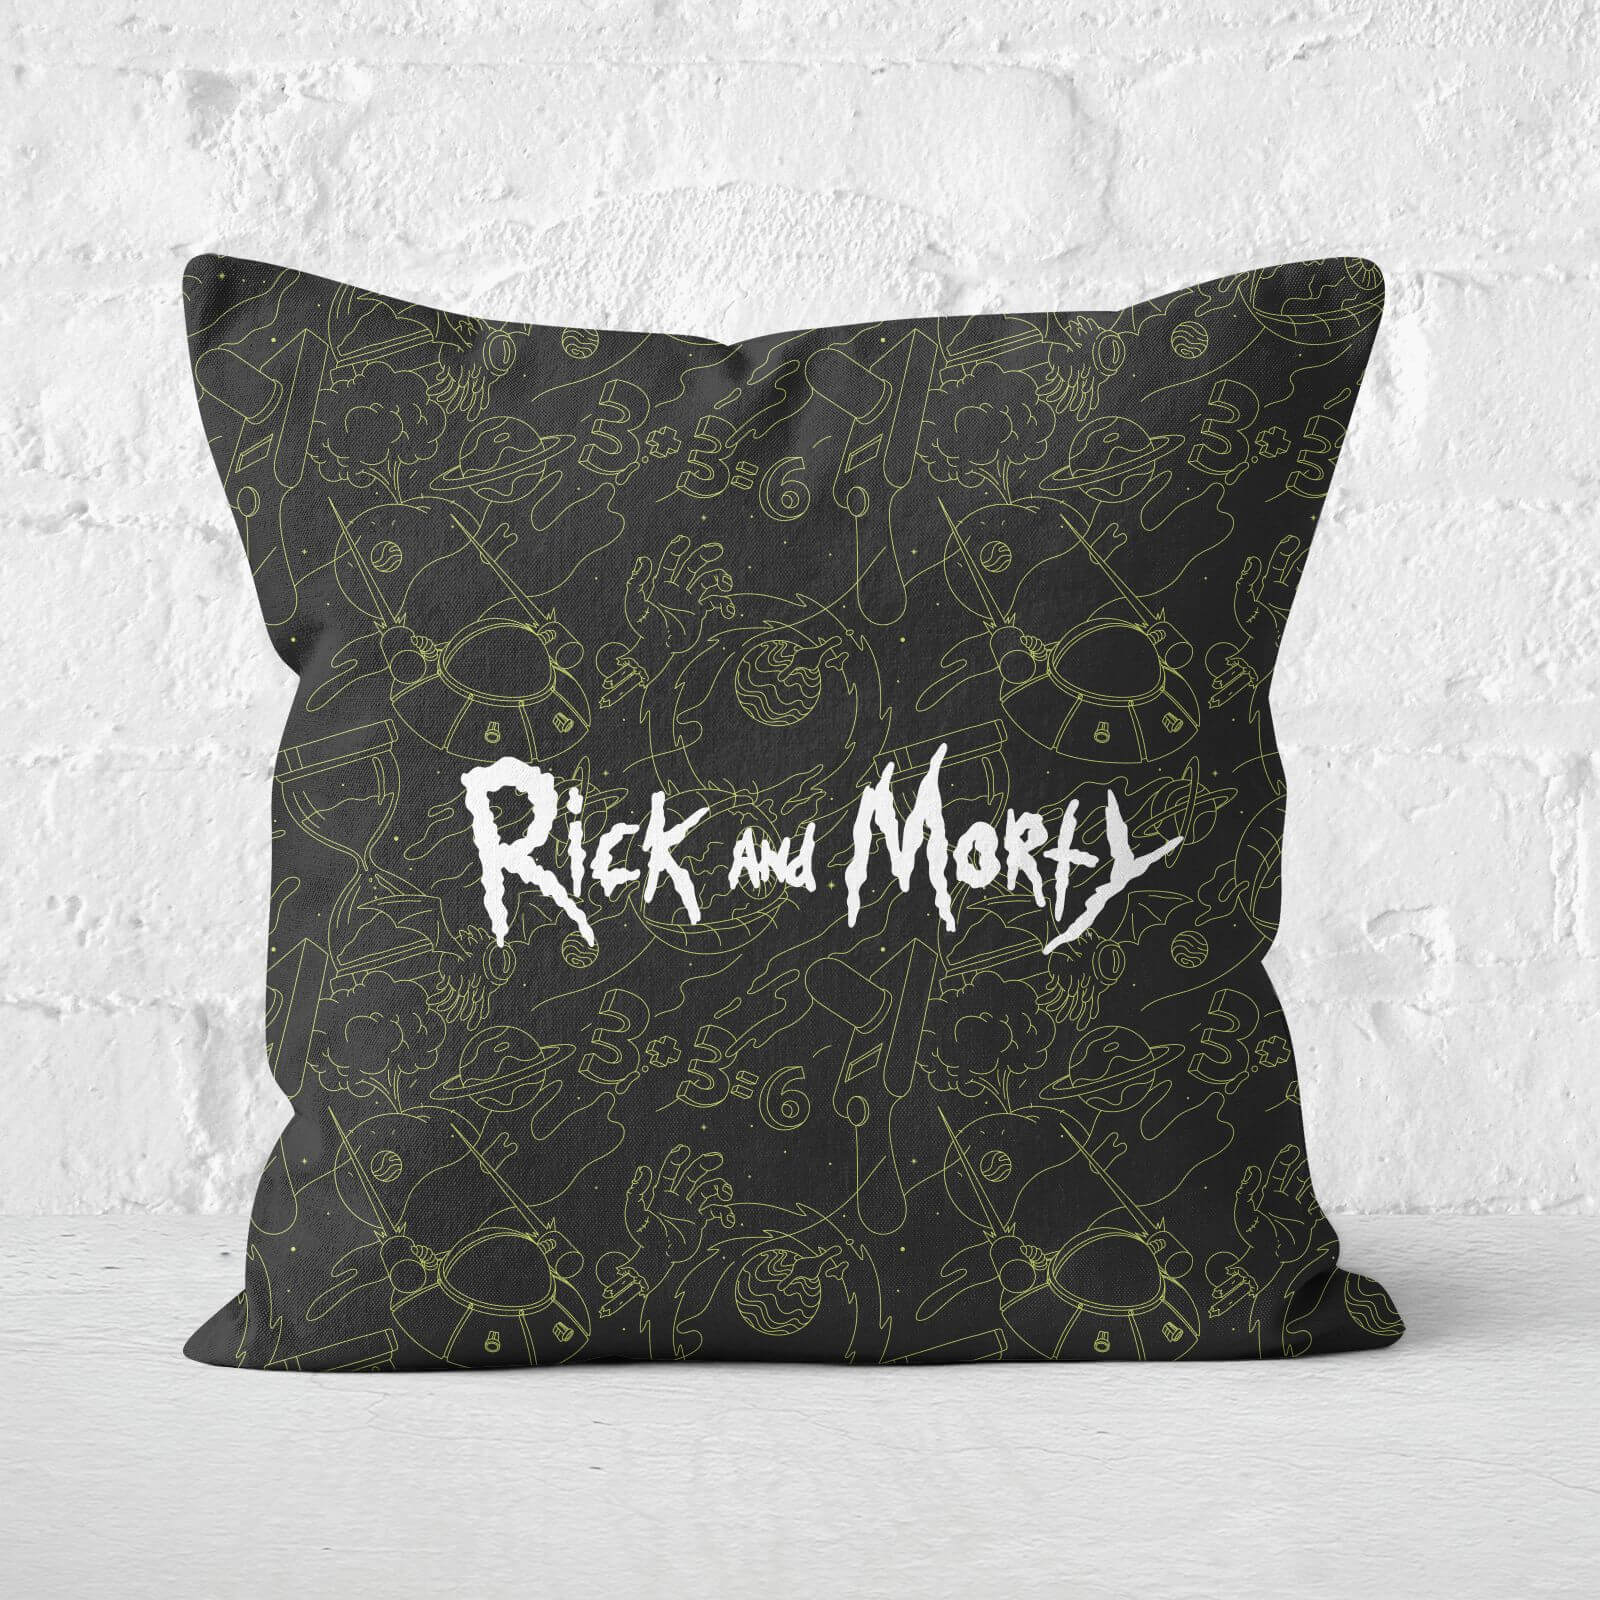 Rick And Morty Square Cushion - 40x40cm - Eco Friendly